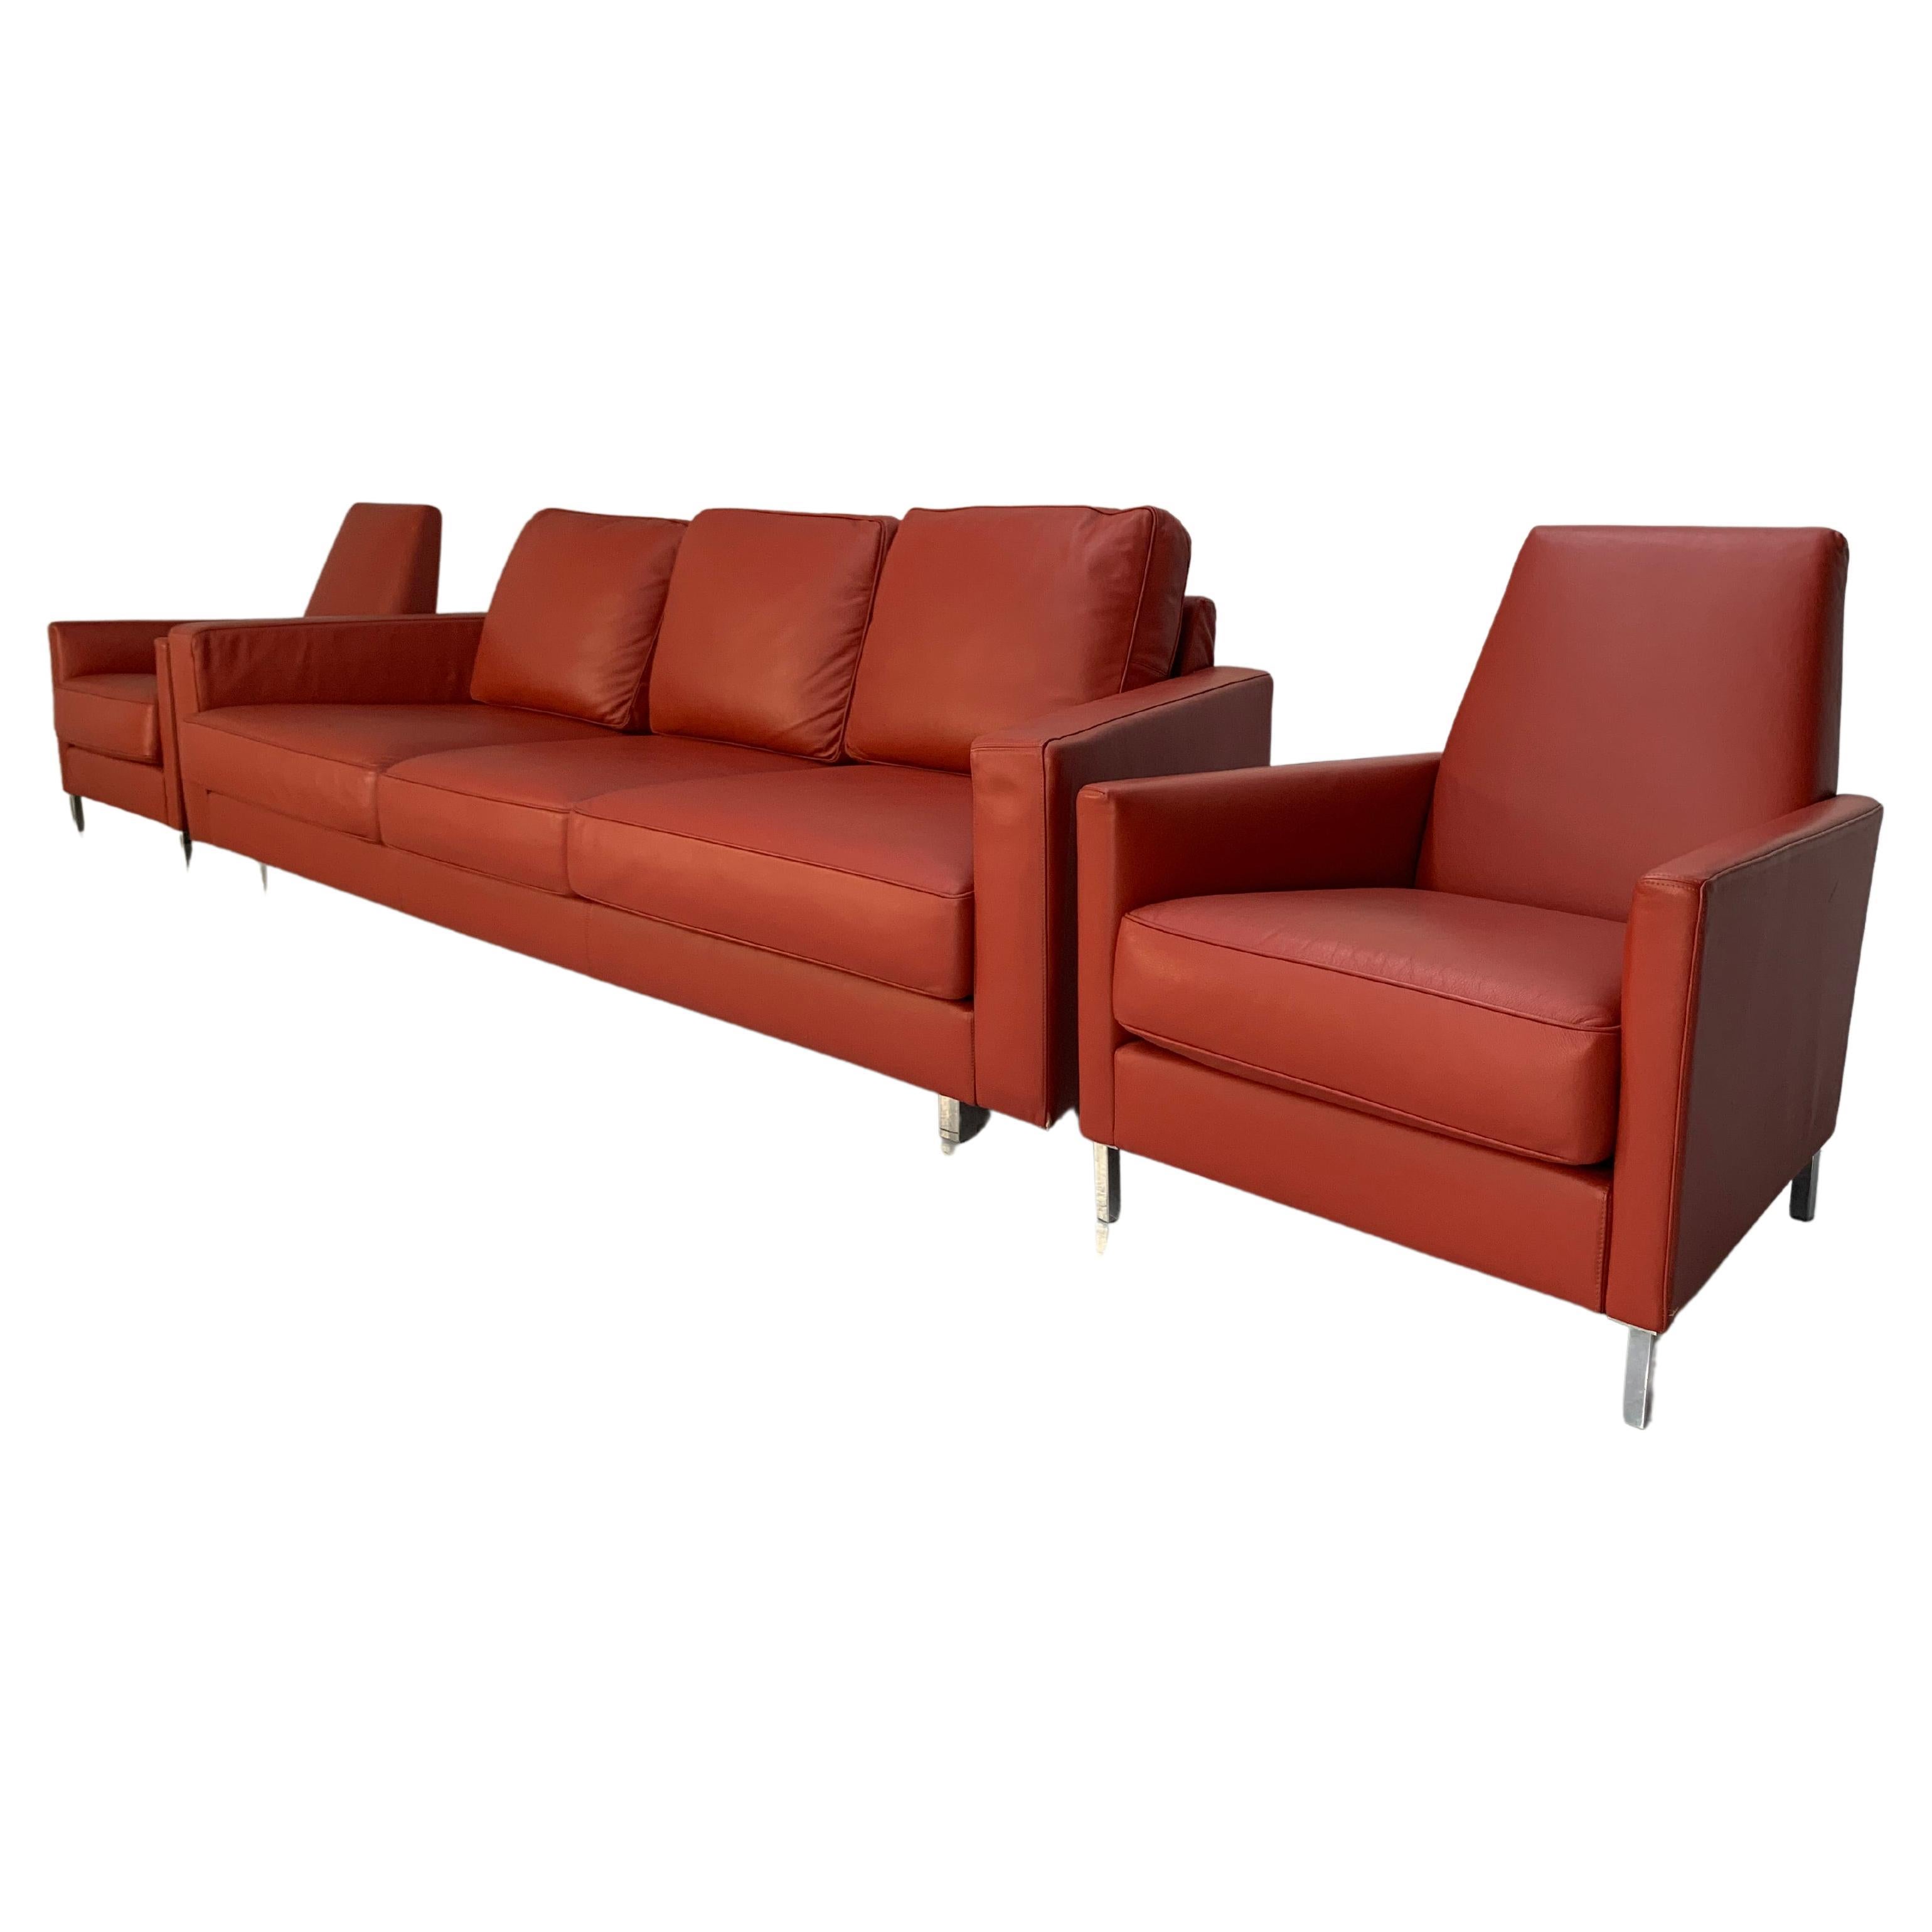 Moroso “Hyde Park” Sofa & 2 Armchair Suite, in Red “Pelle” Leather For Sale